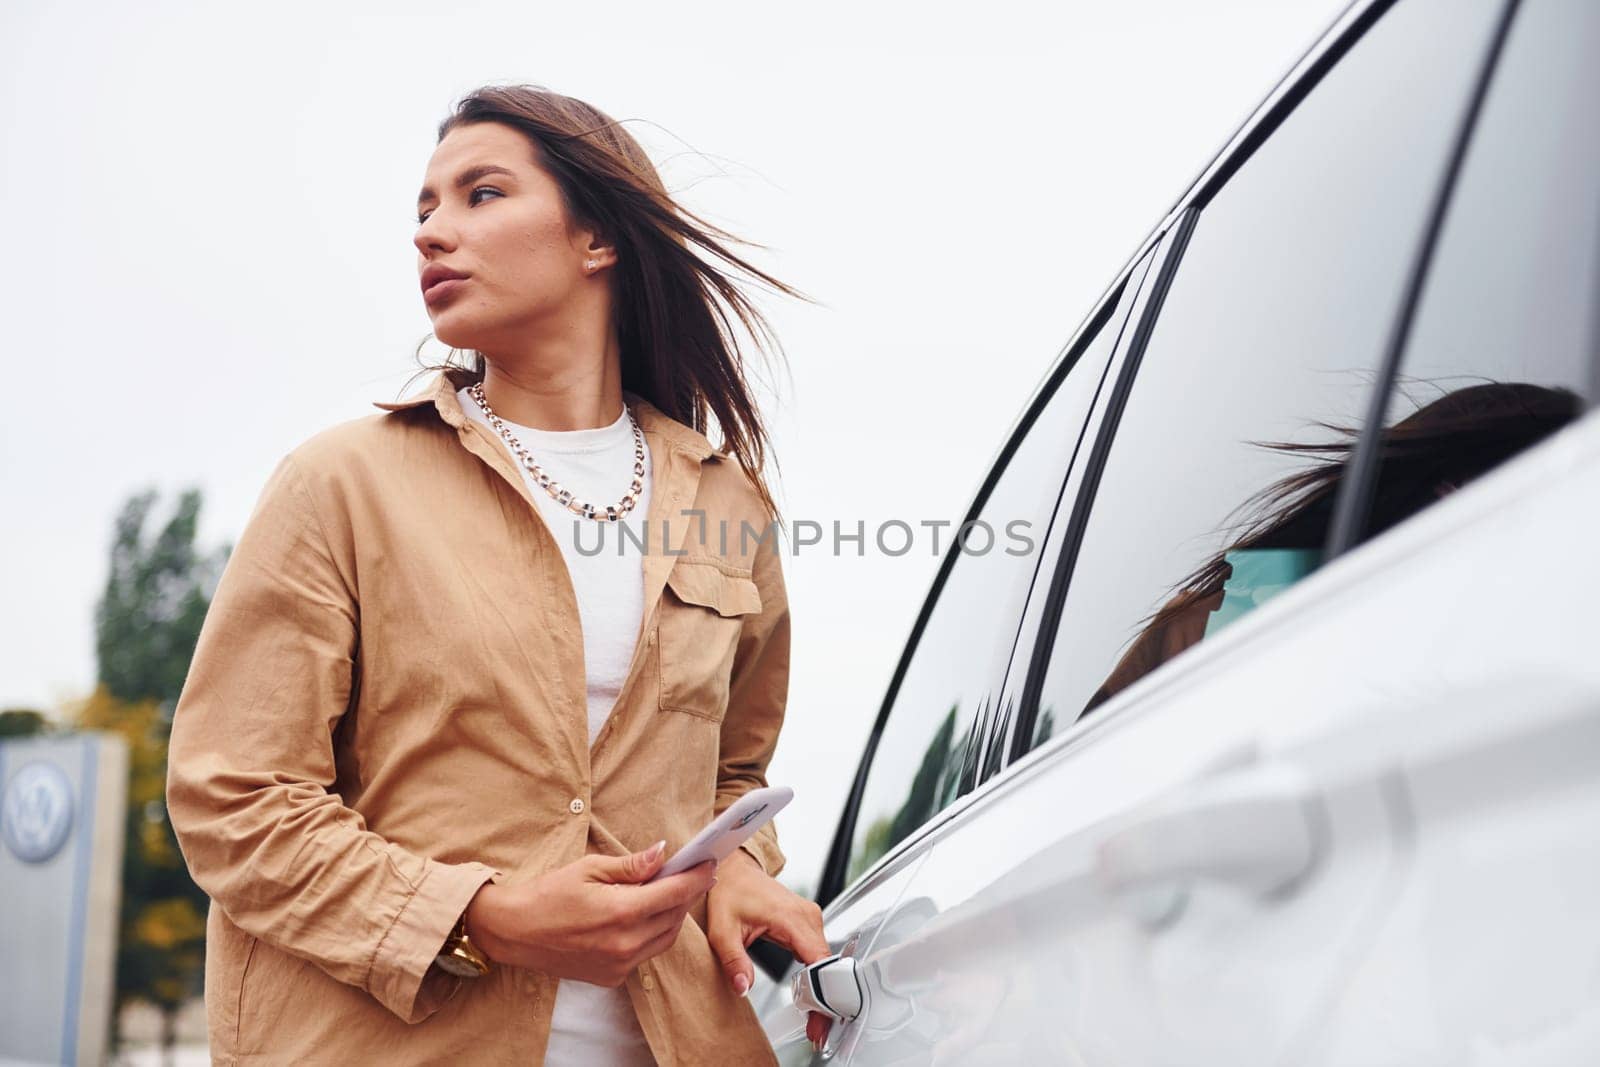 Standing outside and holds phone. Fashionable beautiful young woman and her modern automobile.